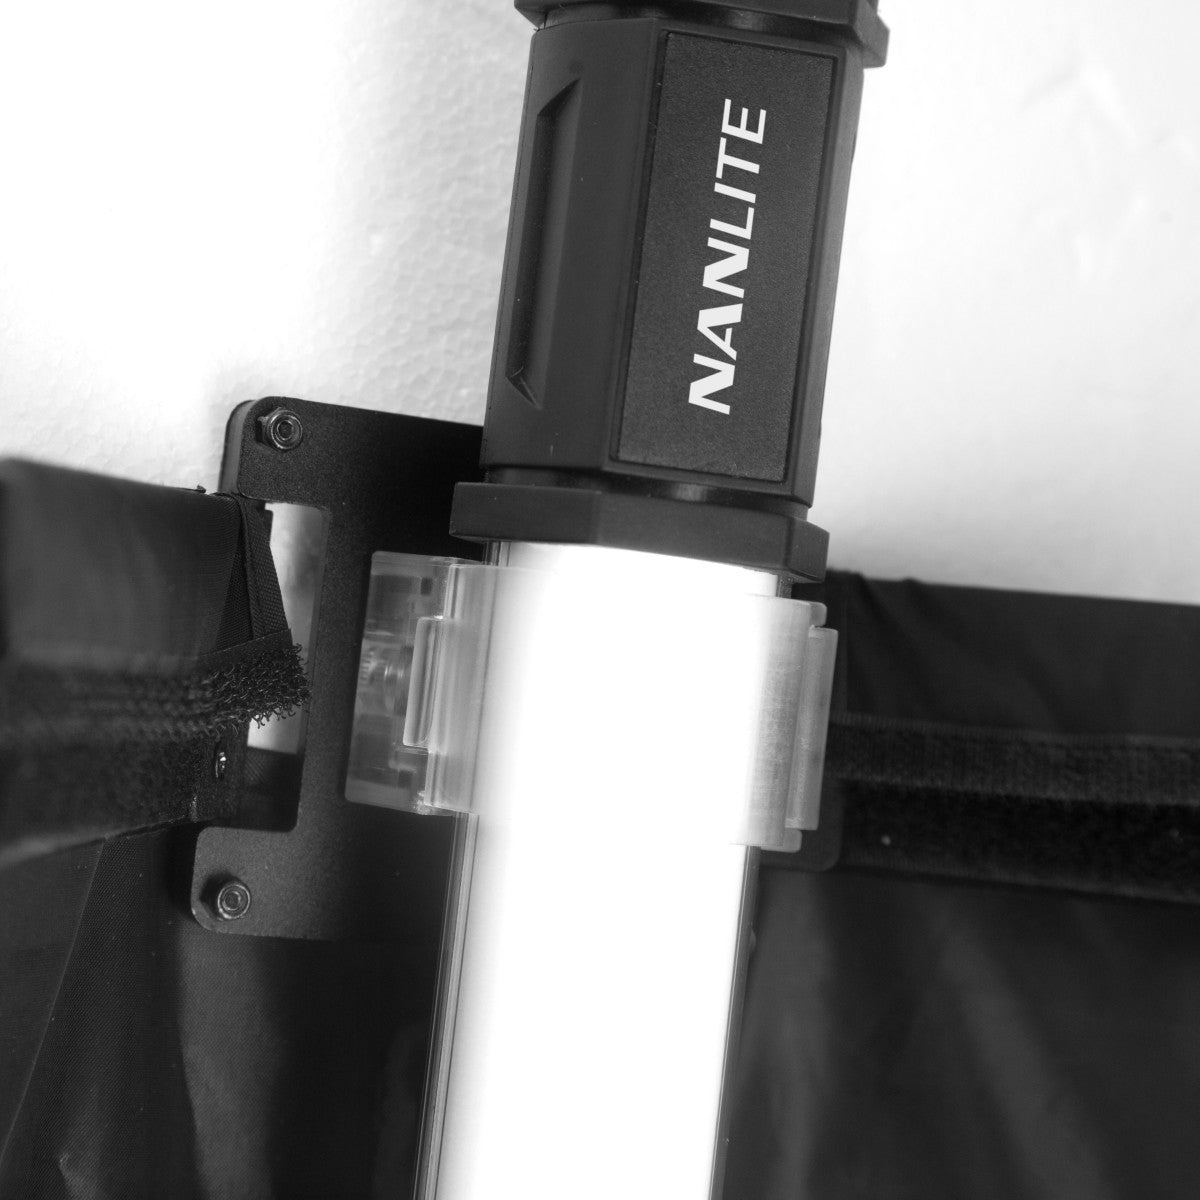 Nanlite PavoTube II 15C 2' LED Tube Light with AC Charger, Mount, and Case